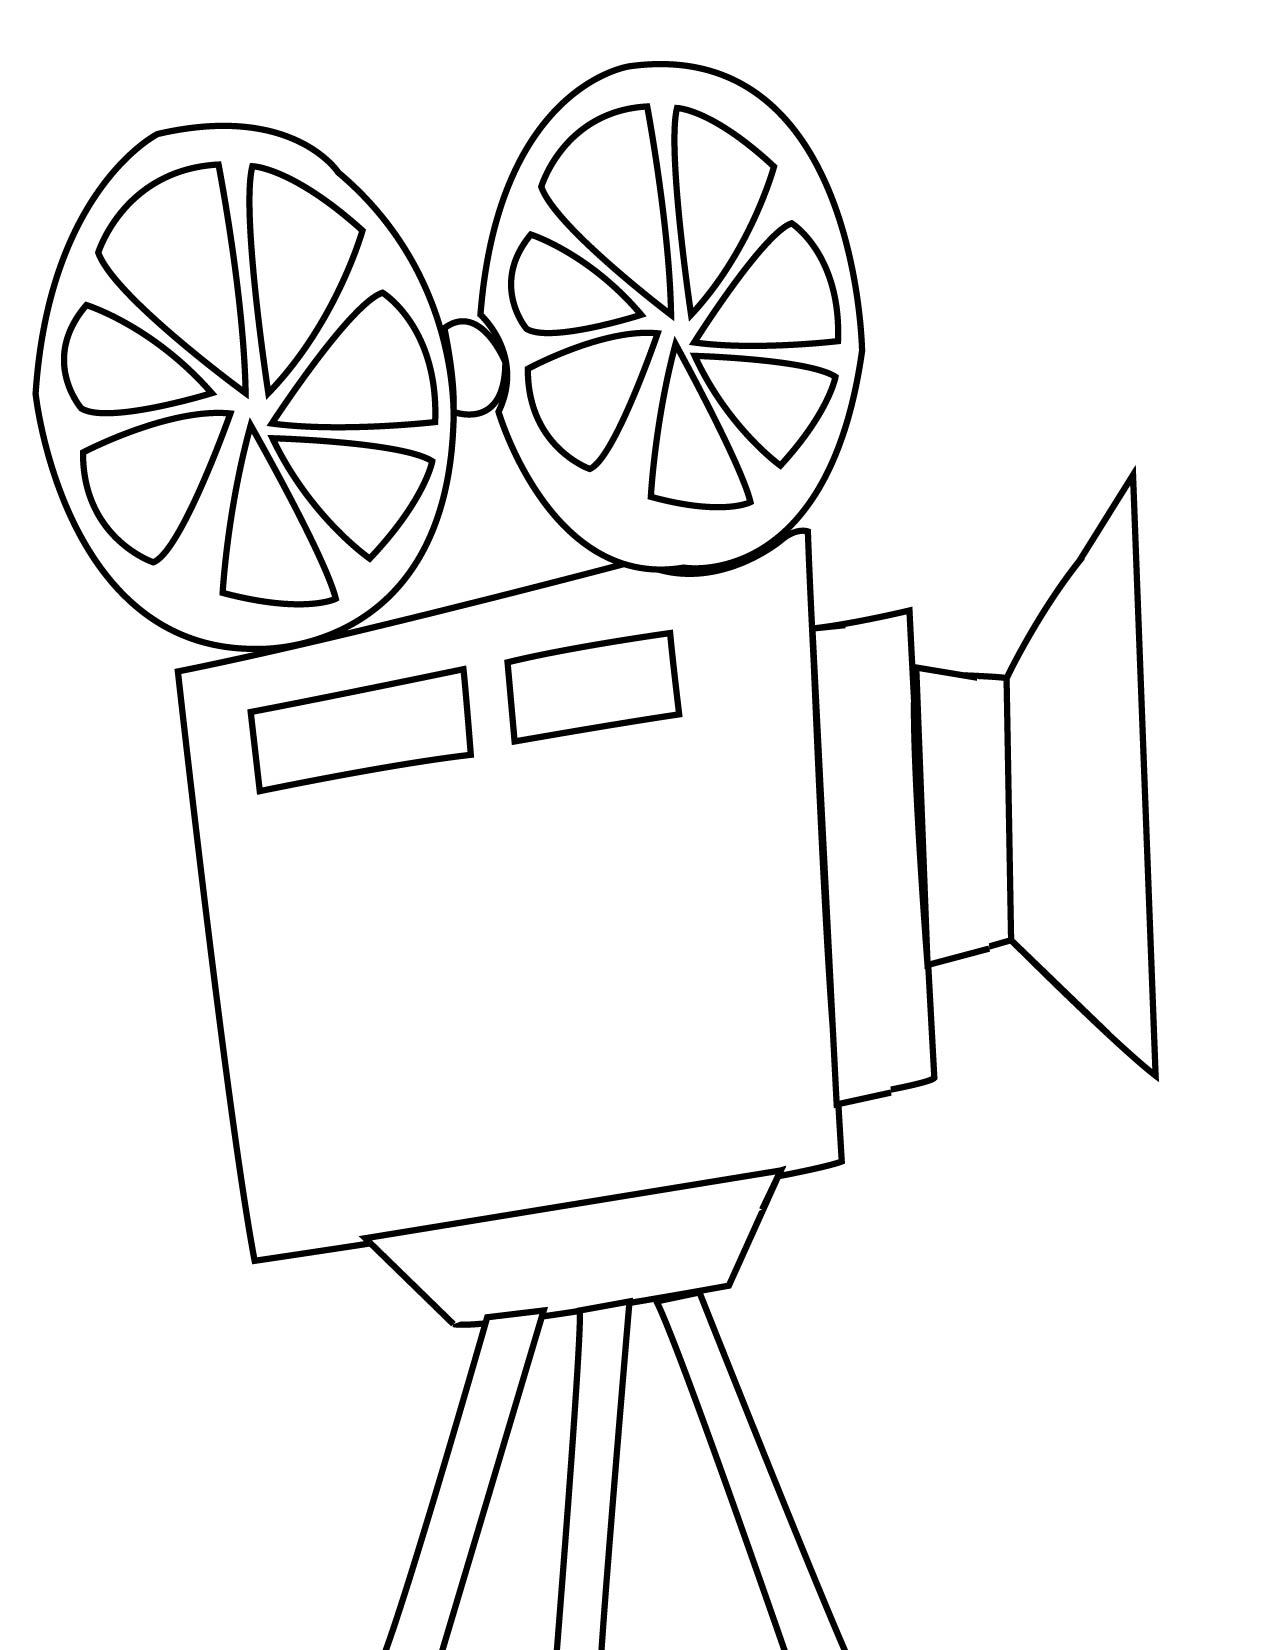 Theatre Coloring Pages At Getcolorings.com | Free Printable Colorings